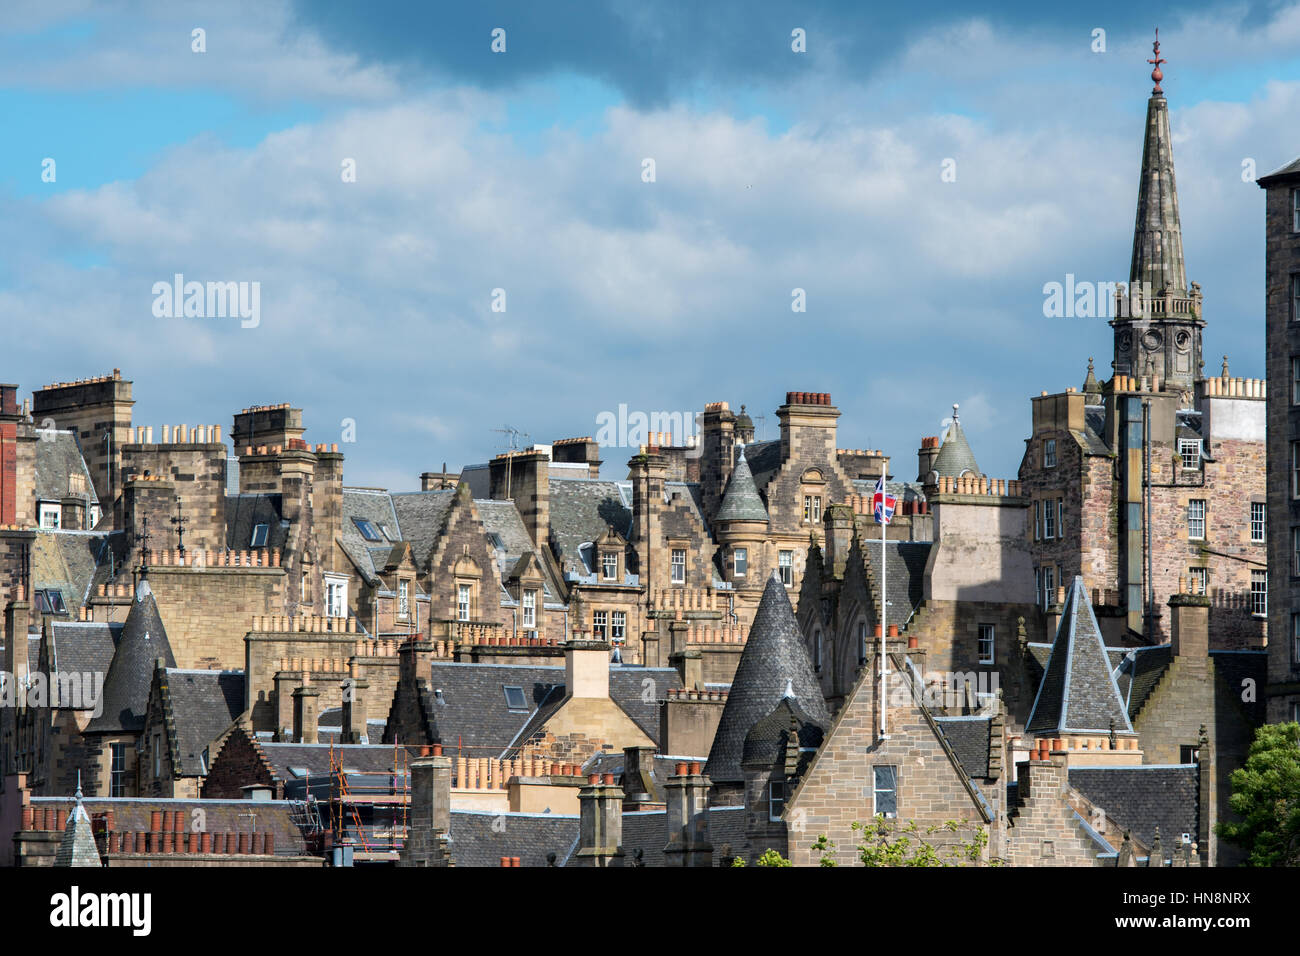 UK, Scotland, Edinburgh - Edinburgh, Scotland's compact, hilly capital. It has a medieval Old Town and elegant Georgian New Town with gardens and neoc Stock Photo